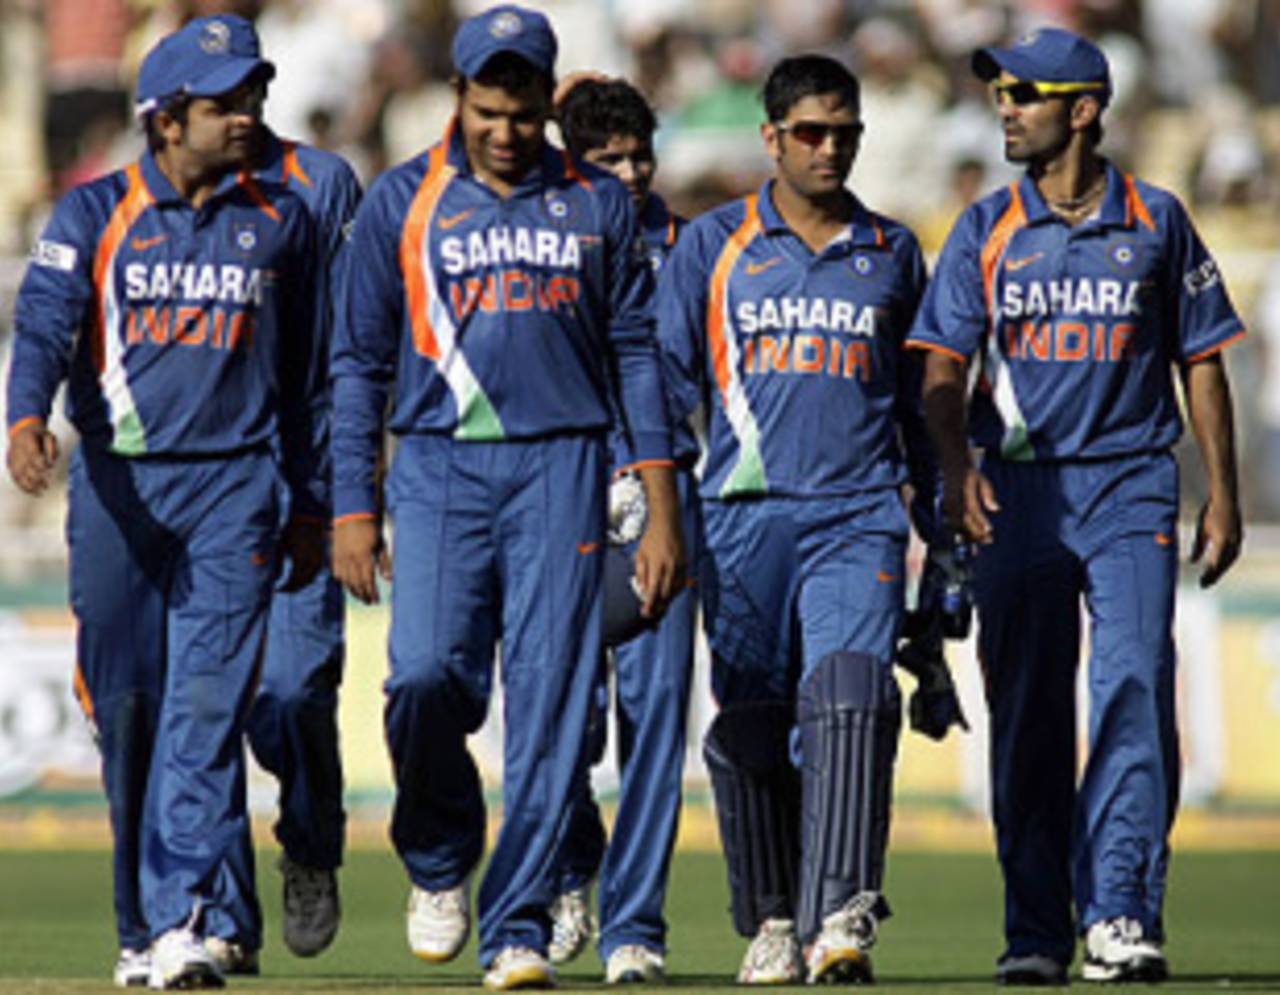 Sahara is unlikely to continue its sponsorship of the Indian team&nbsp;&nbsp;&bull;&nbsp;&nbsp;Associated Press